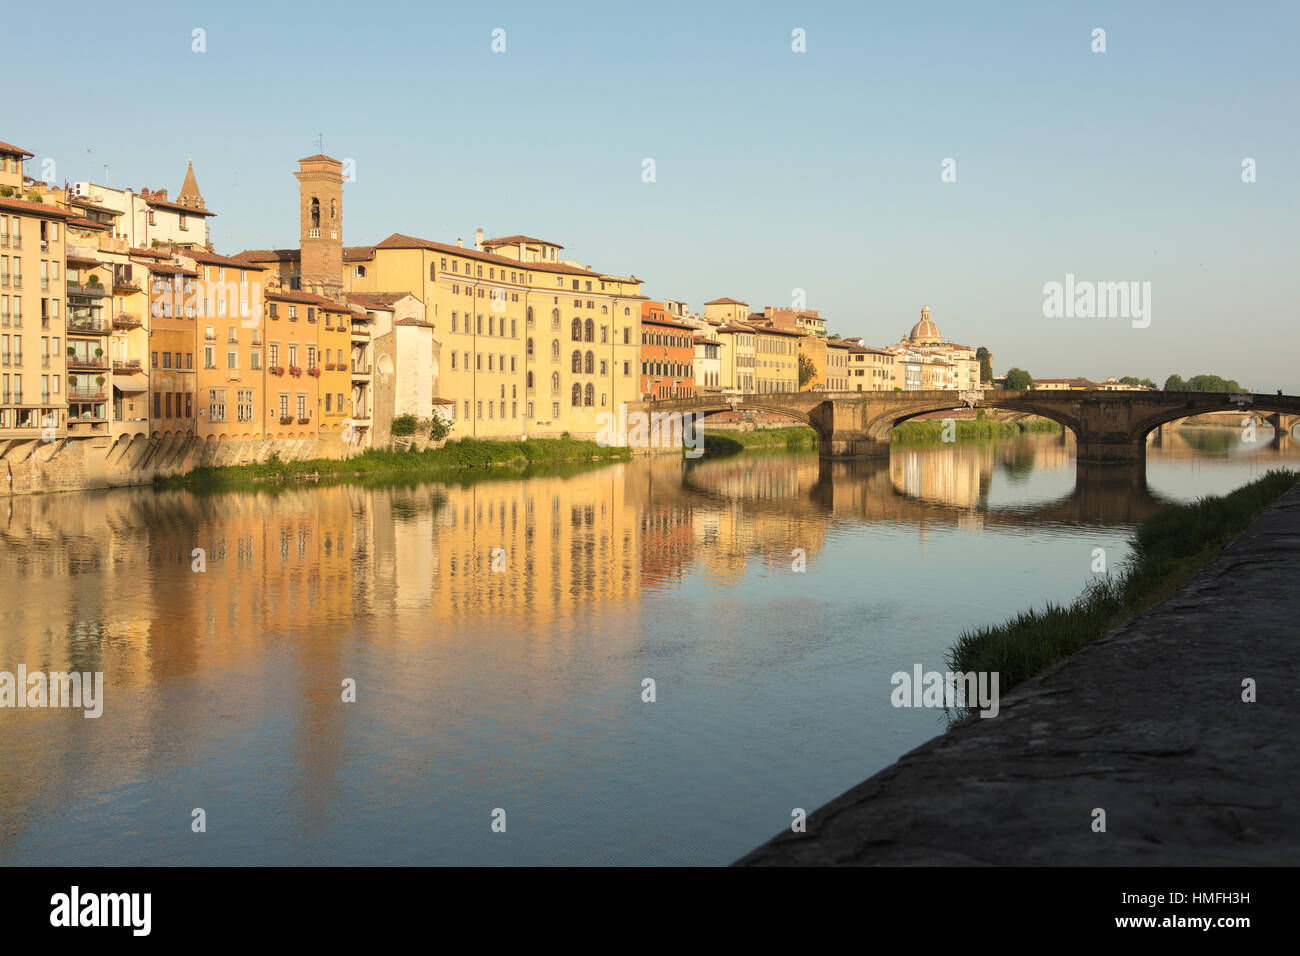 View of Ponte Della Vittoria on the Arno River with Brunelleschi's Dome in the background, Florence, Tuscany, Italy Stock Photo